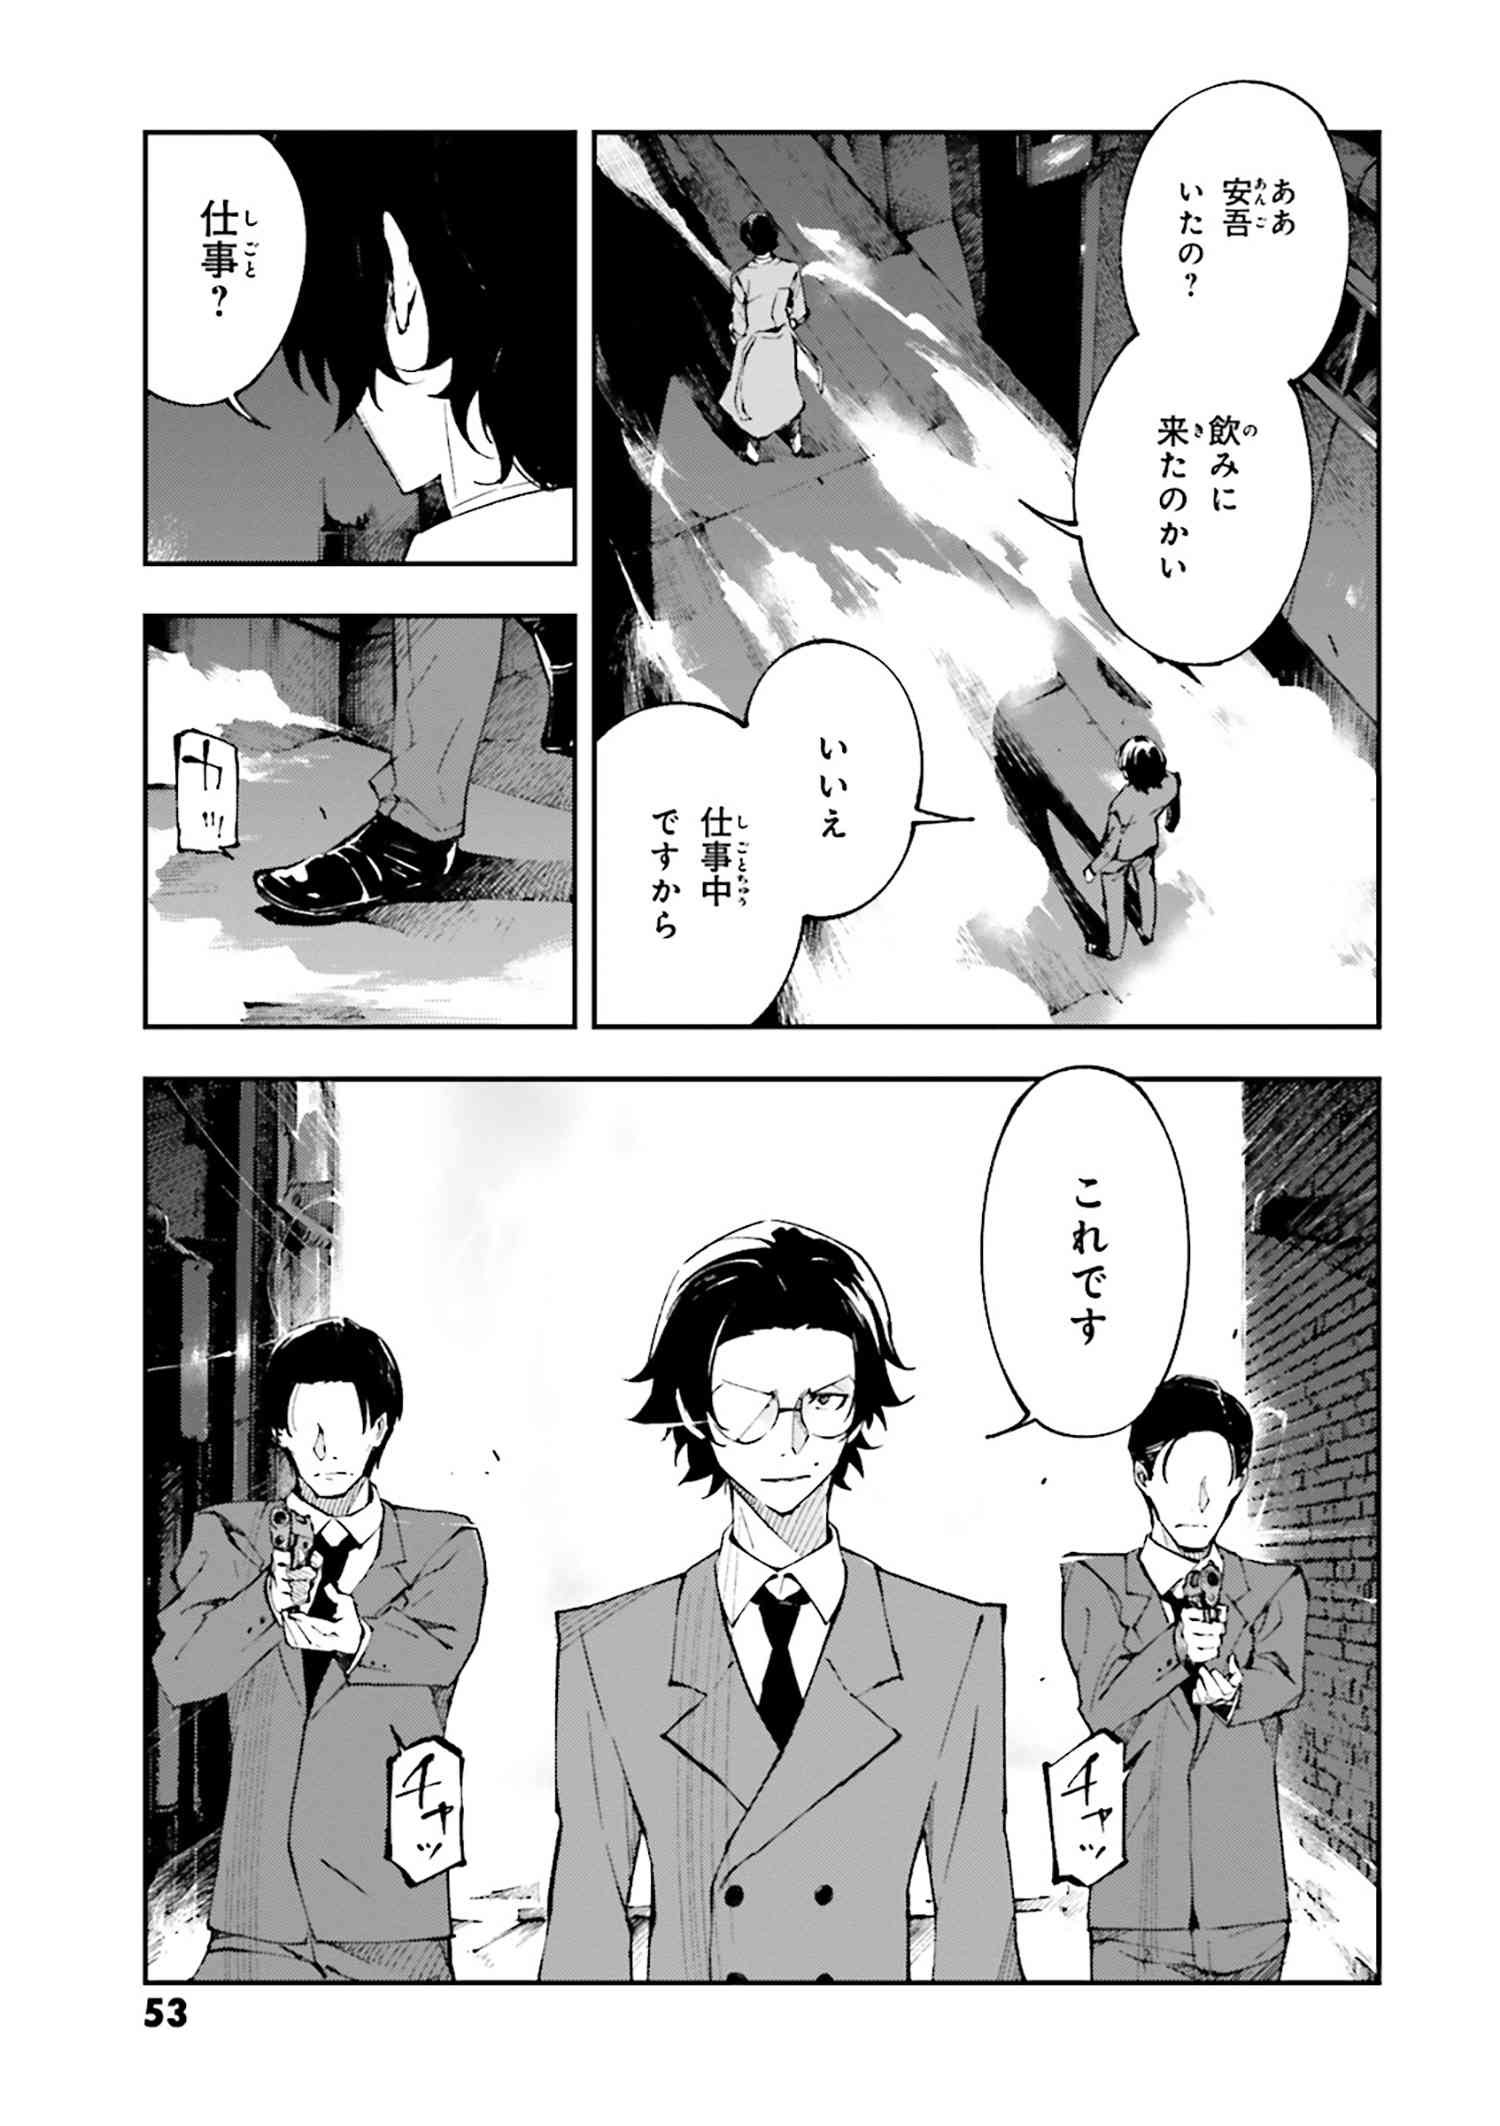 Bungou Stray Dogs: Dead Apple - Chapter 1-2 - Page 22